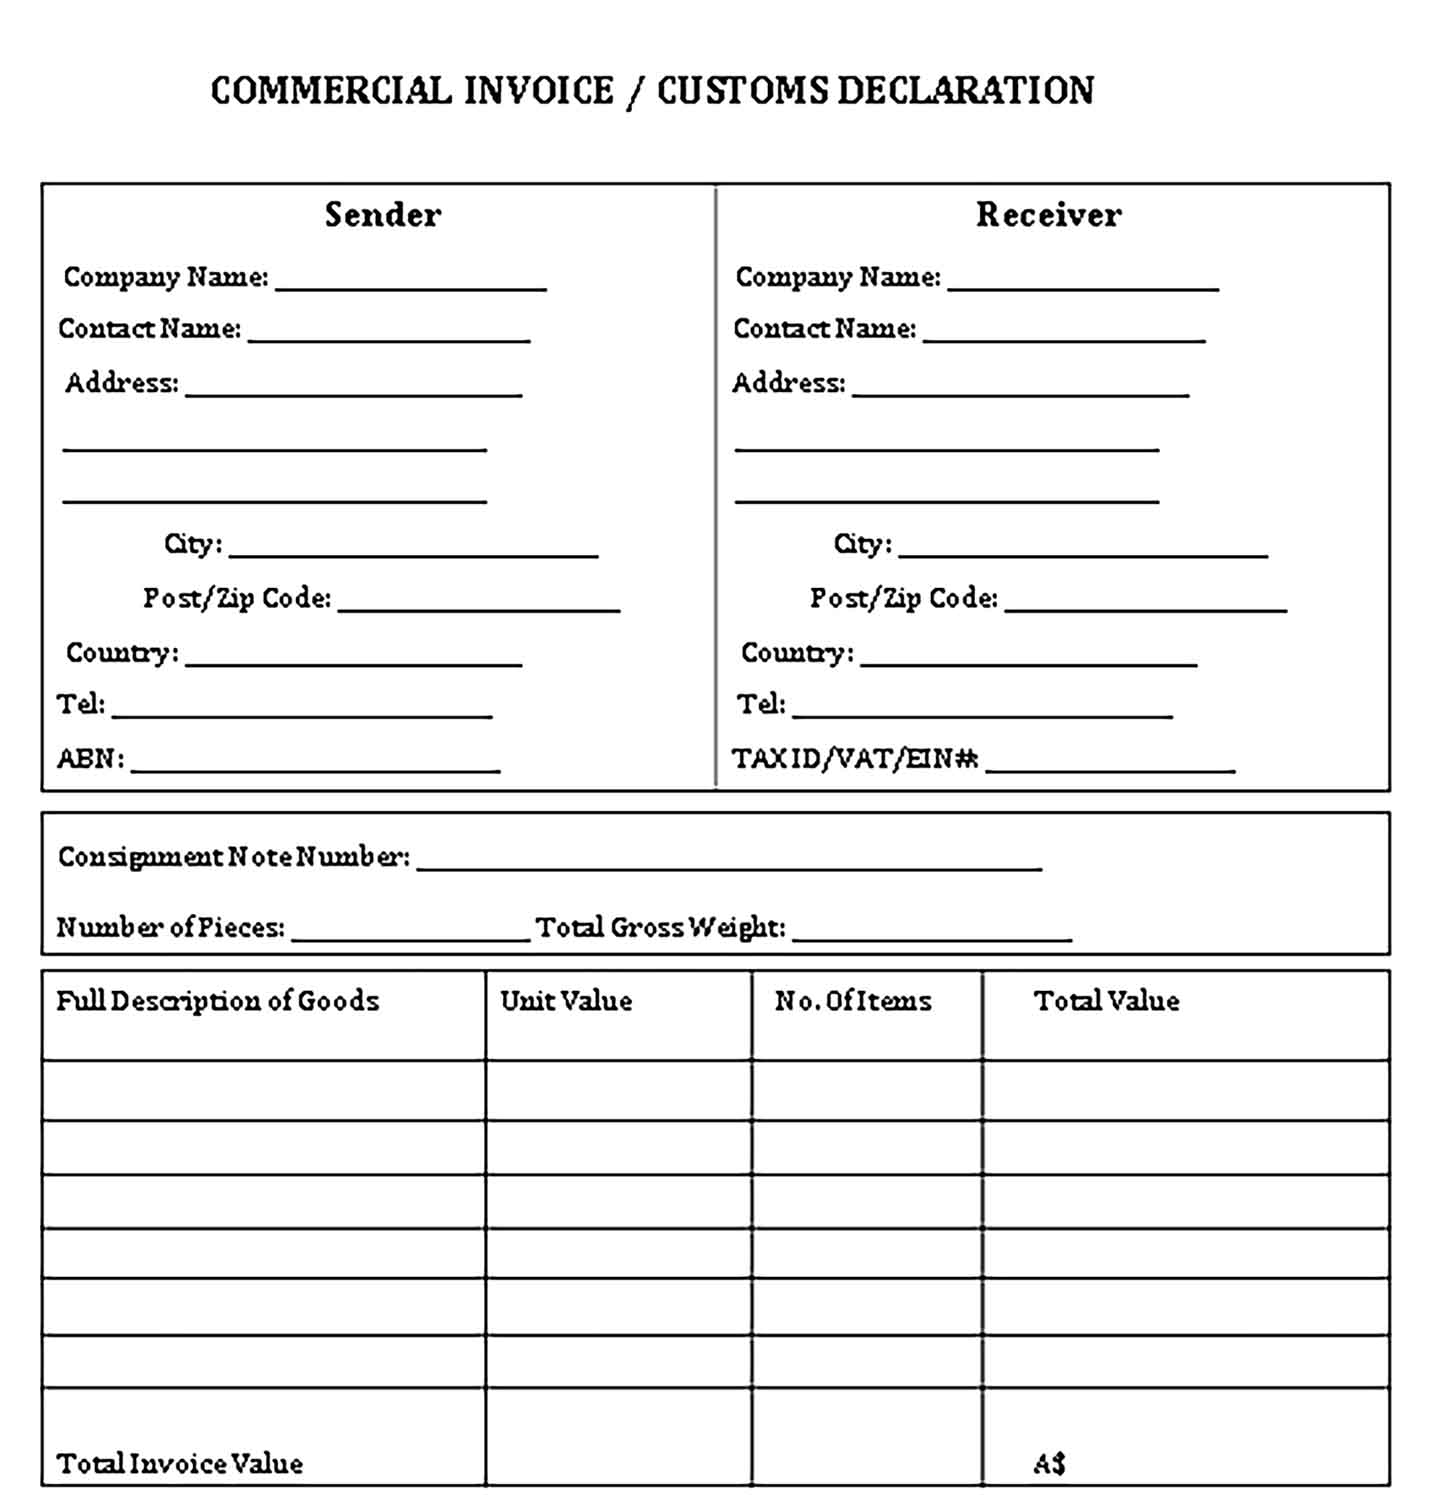 Sample Templates Commercial Invoice Custom Decleration 1